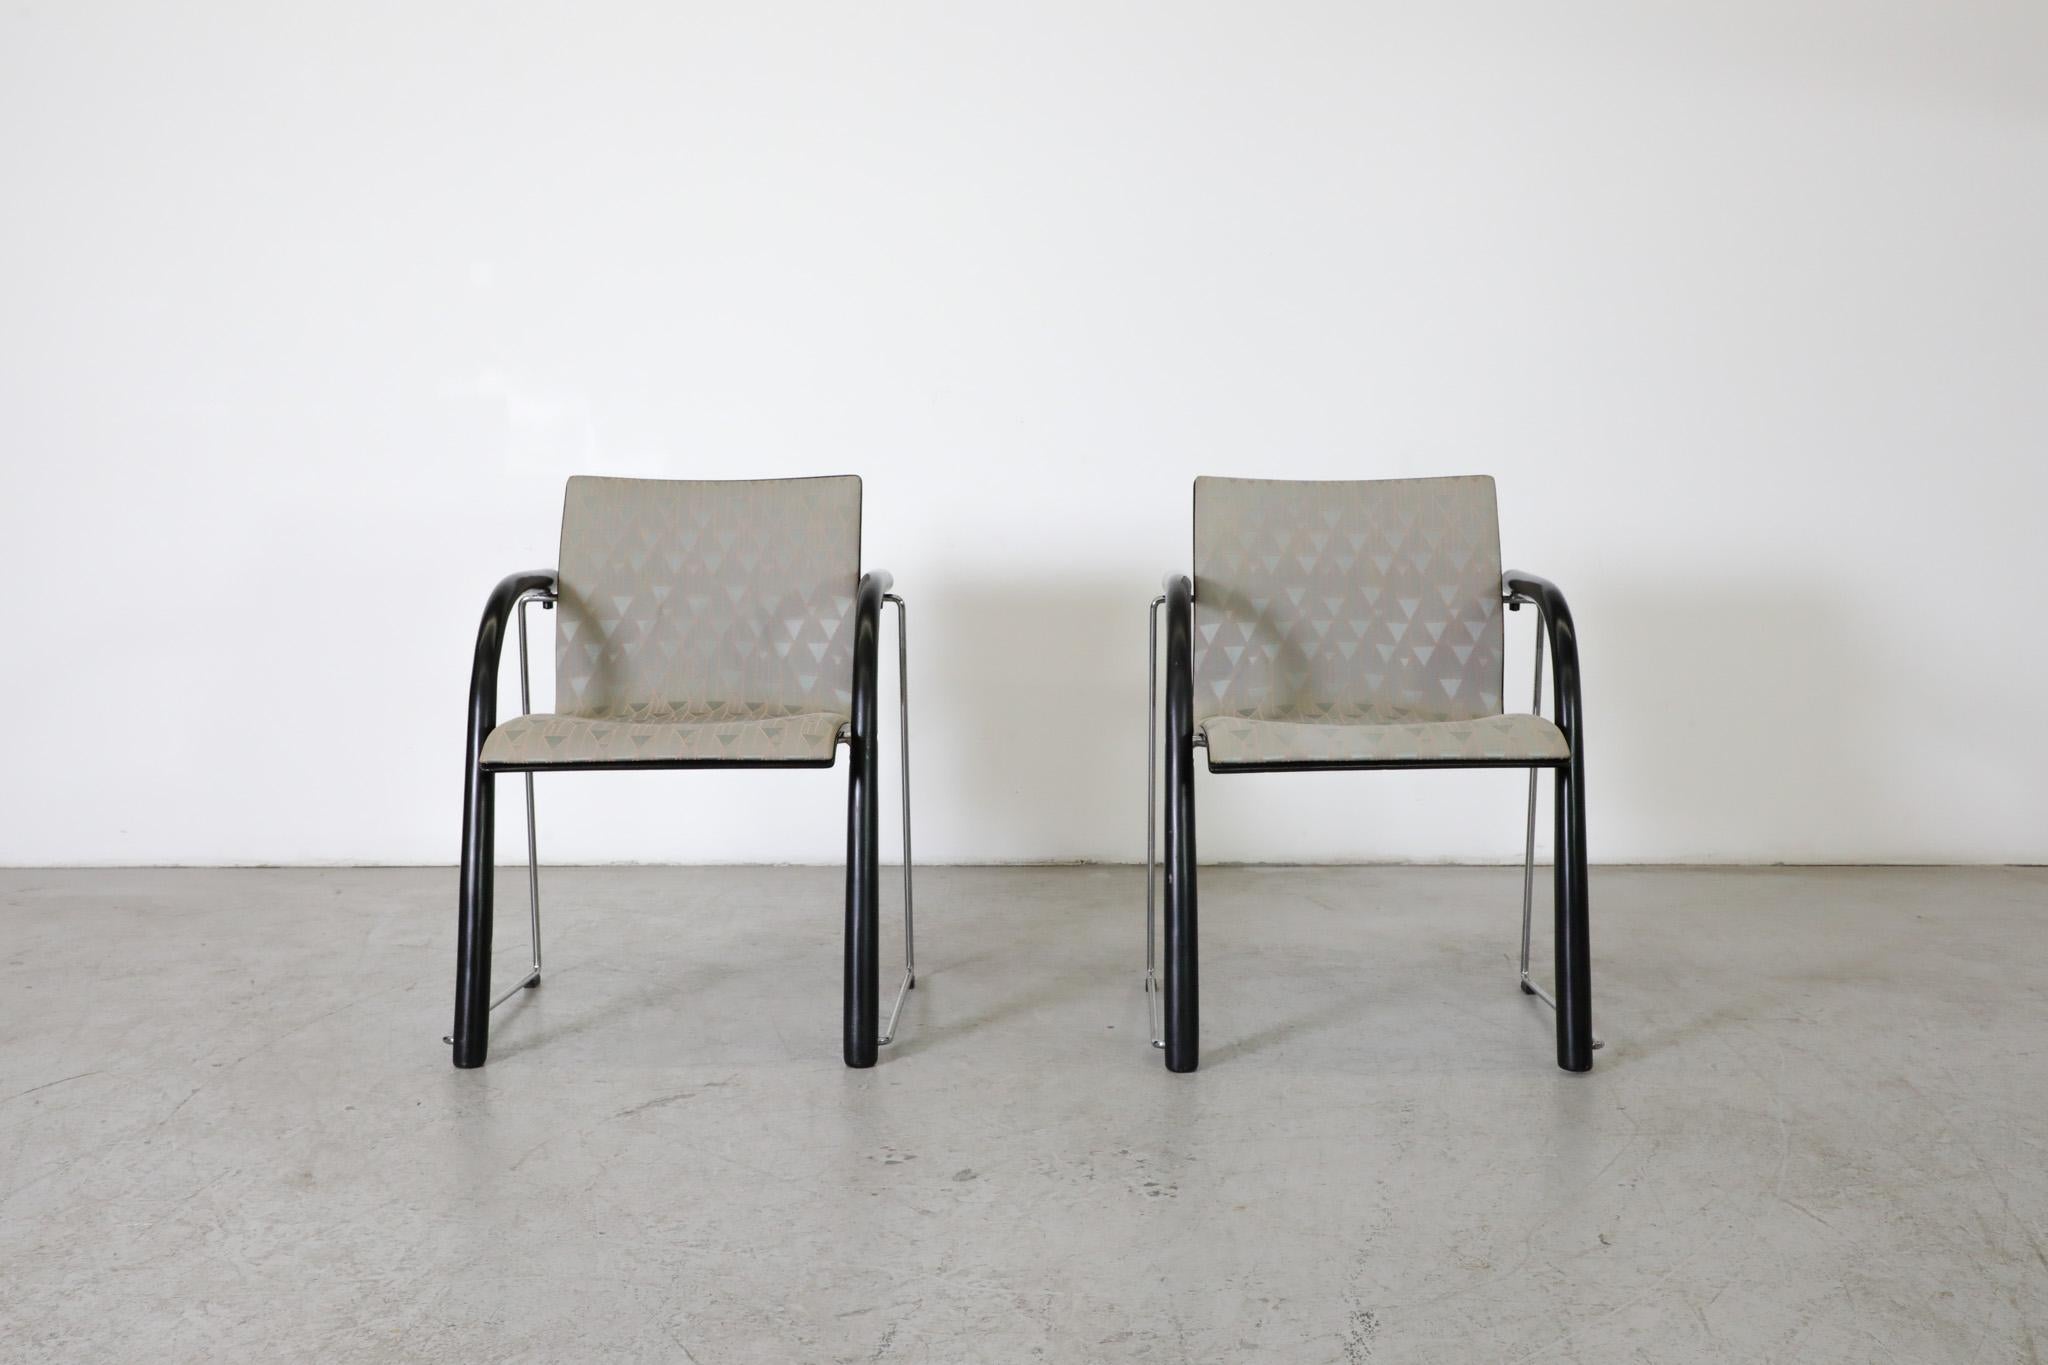 Lacquered Pair of Thonet S320 by Wulf Schneider & Ulrich Böhme Chairs w/ Black Curved Arms For Sale